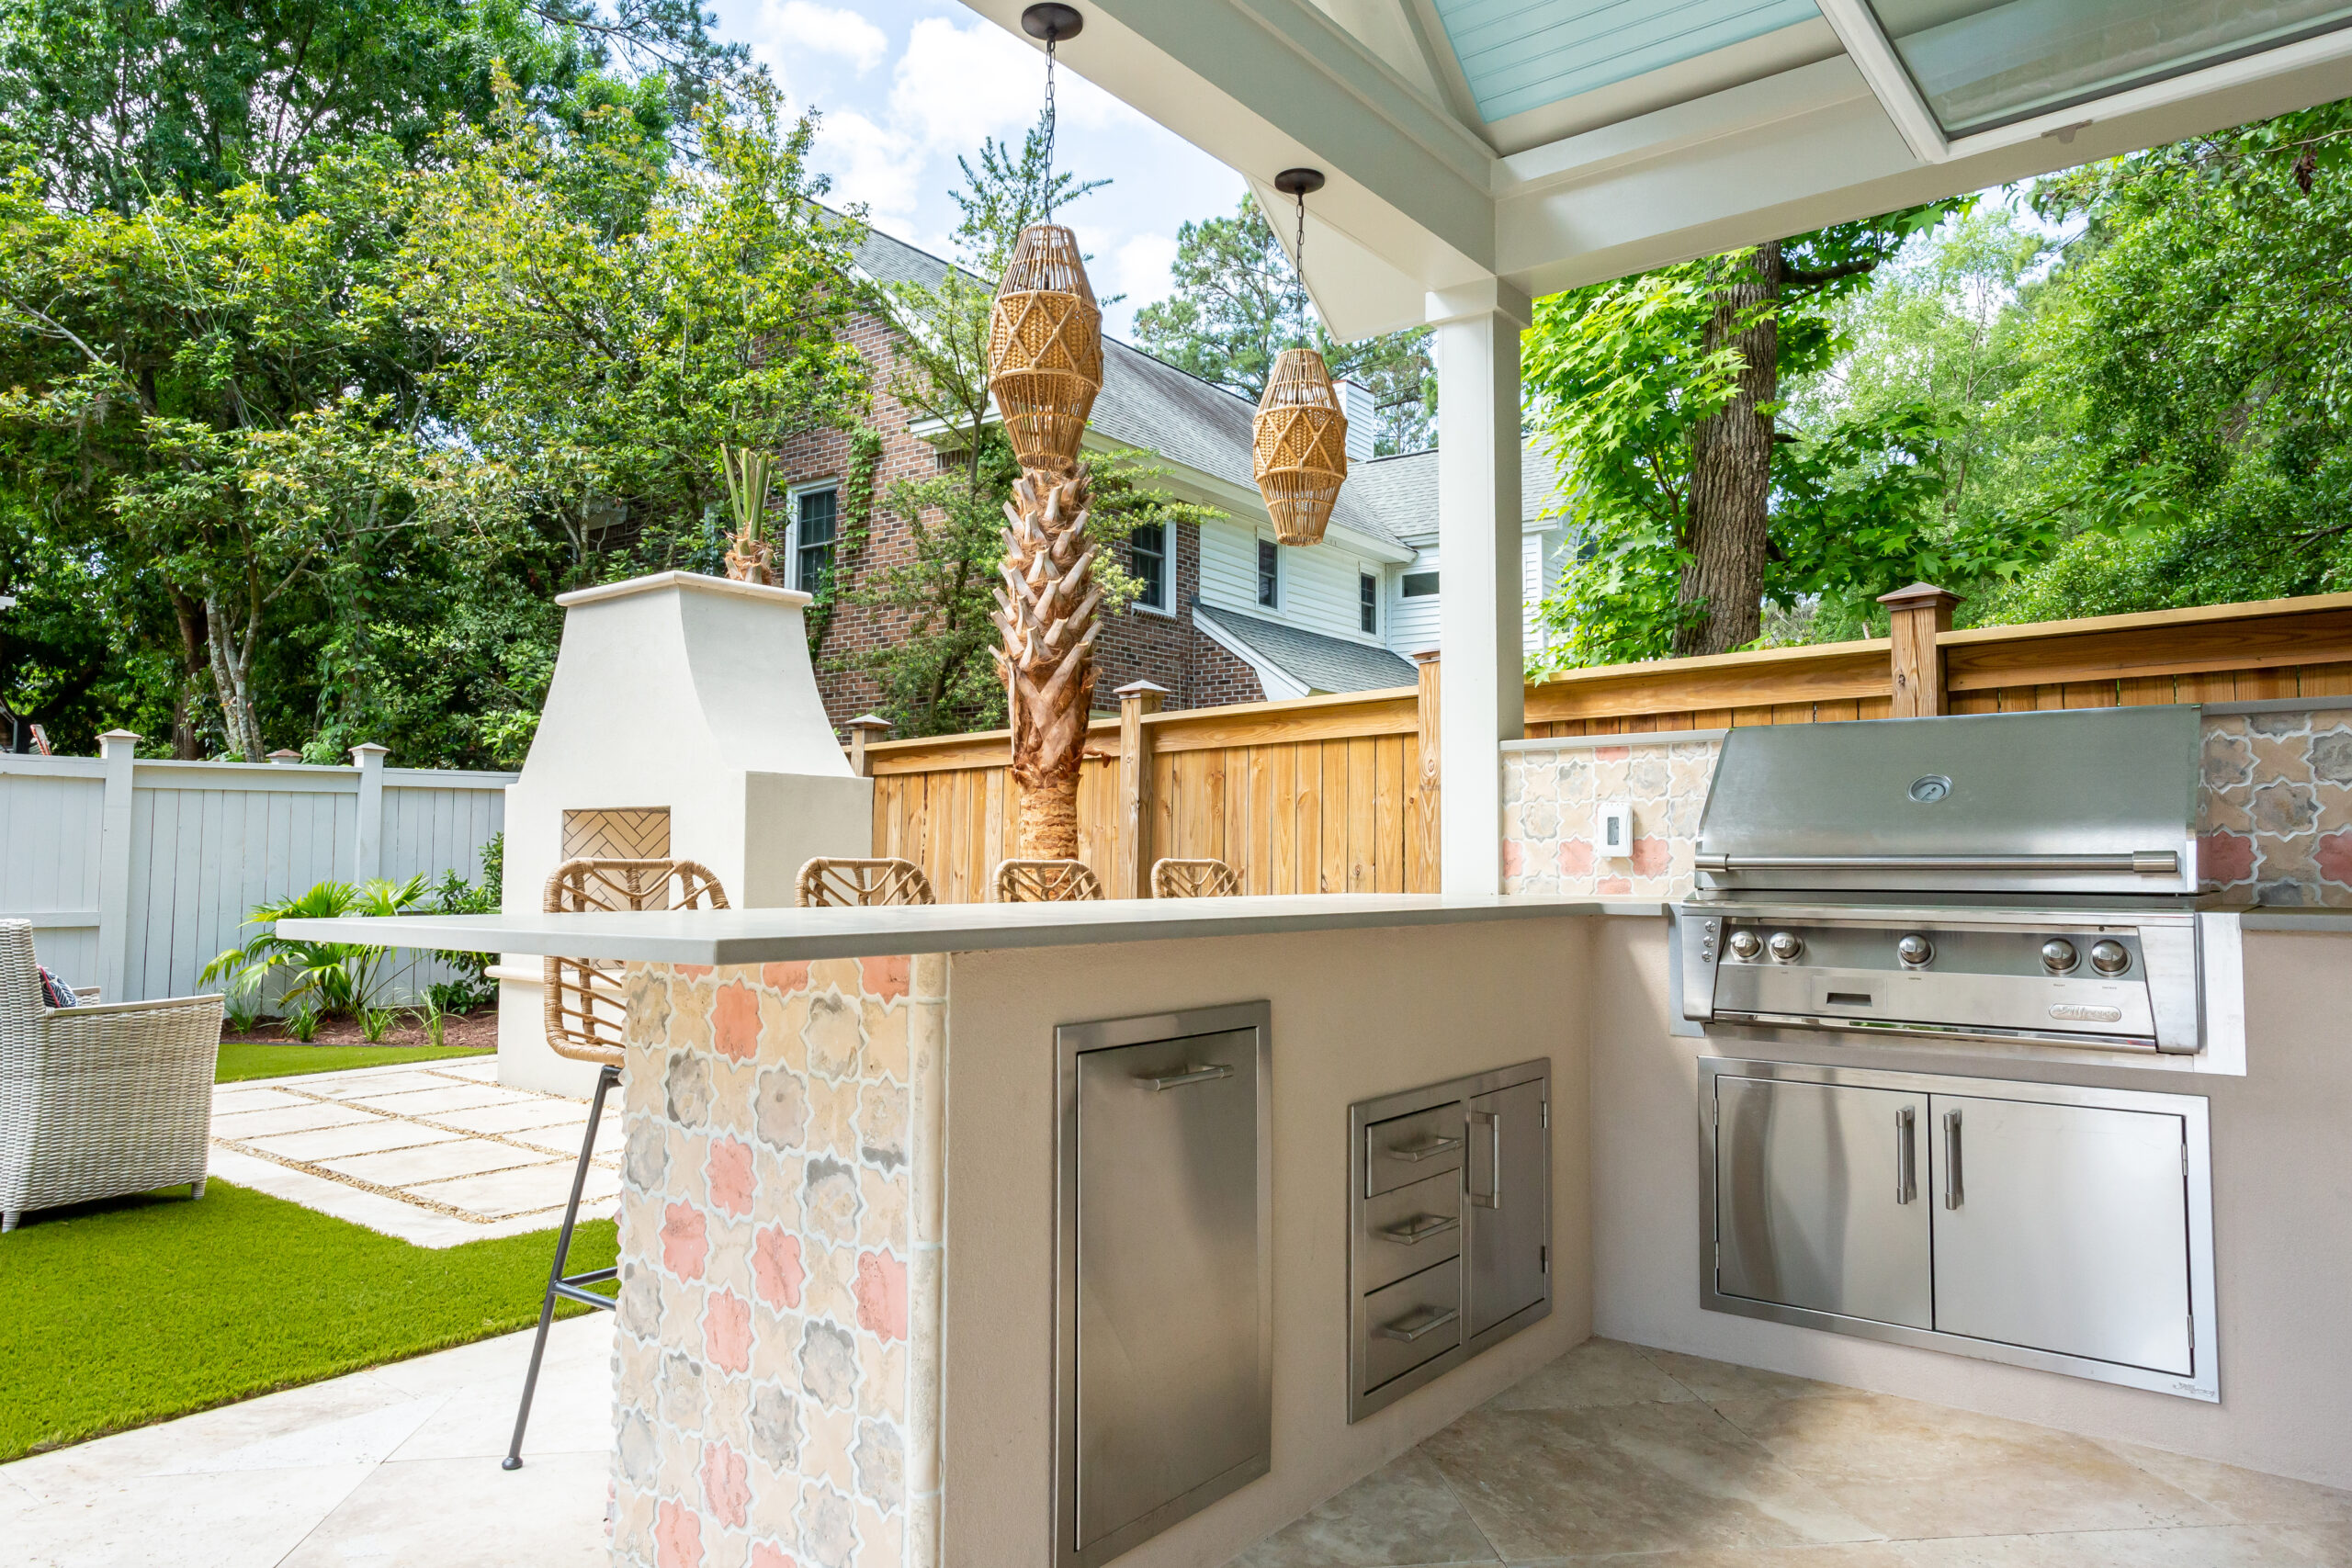 Outdoor Kitchen with Stainless Steel Grill, refrigerator & trash - CK-Contracting, Mount Pleasant, SC